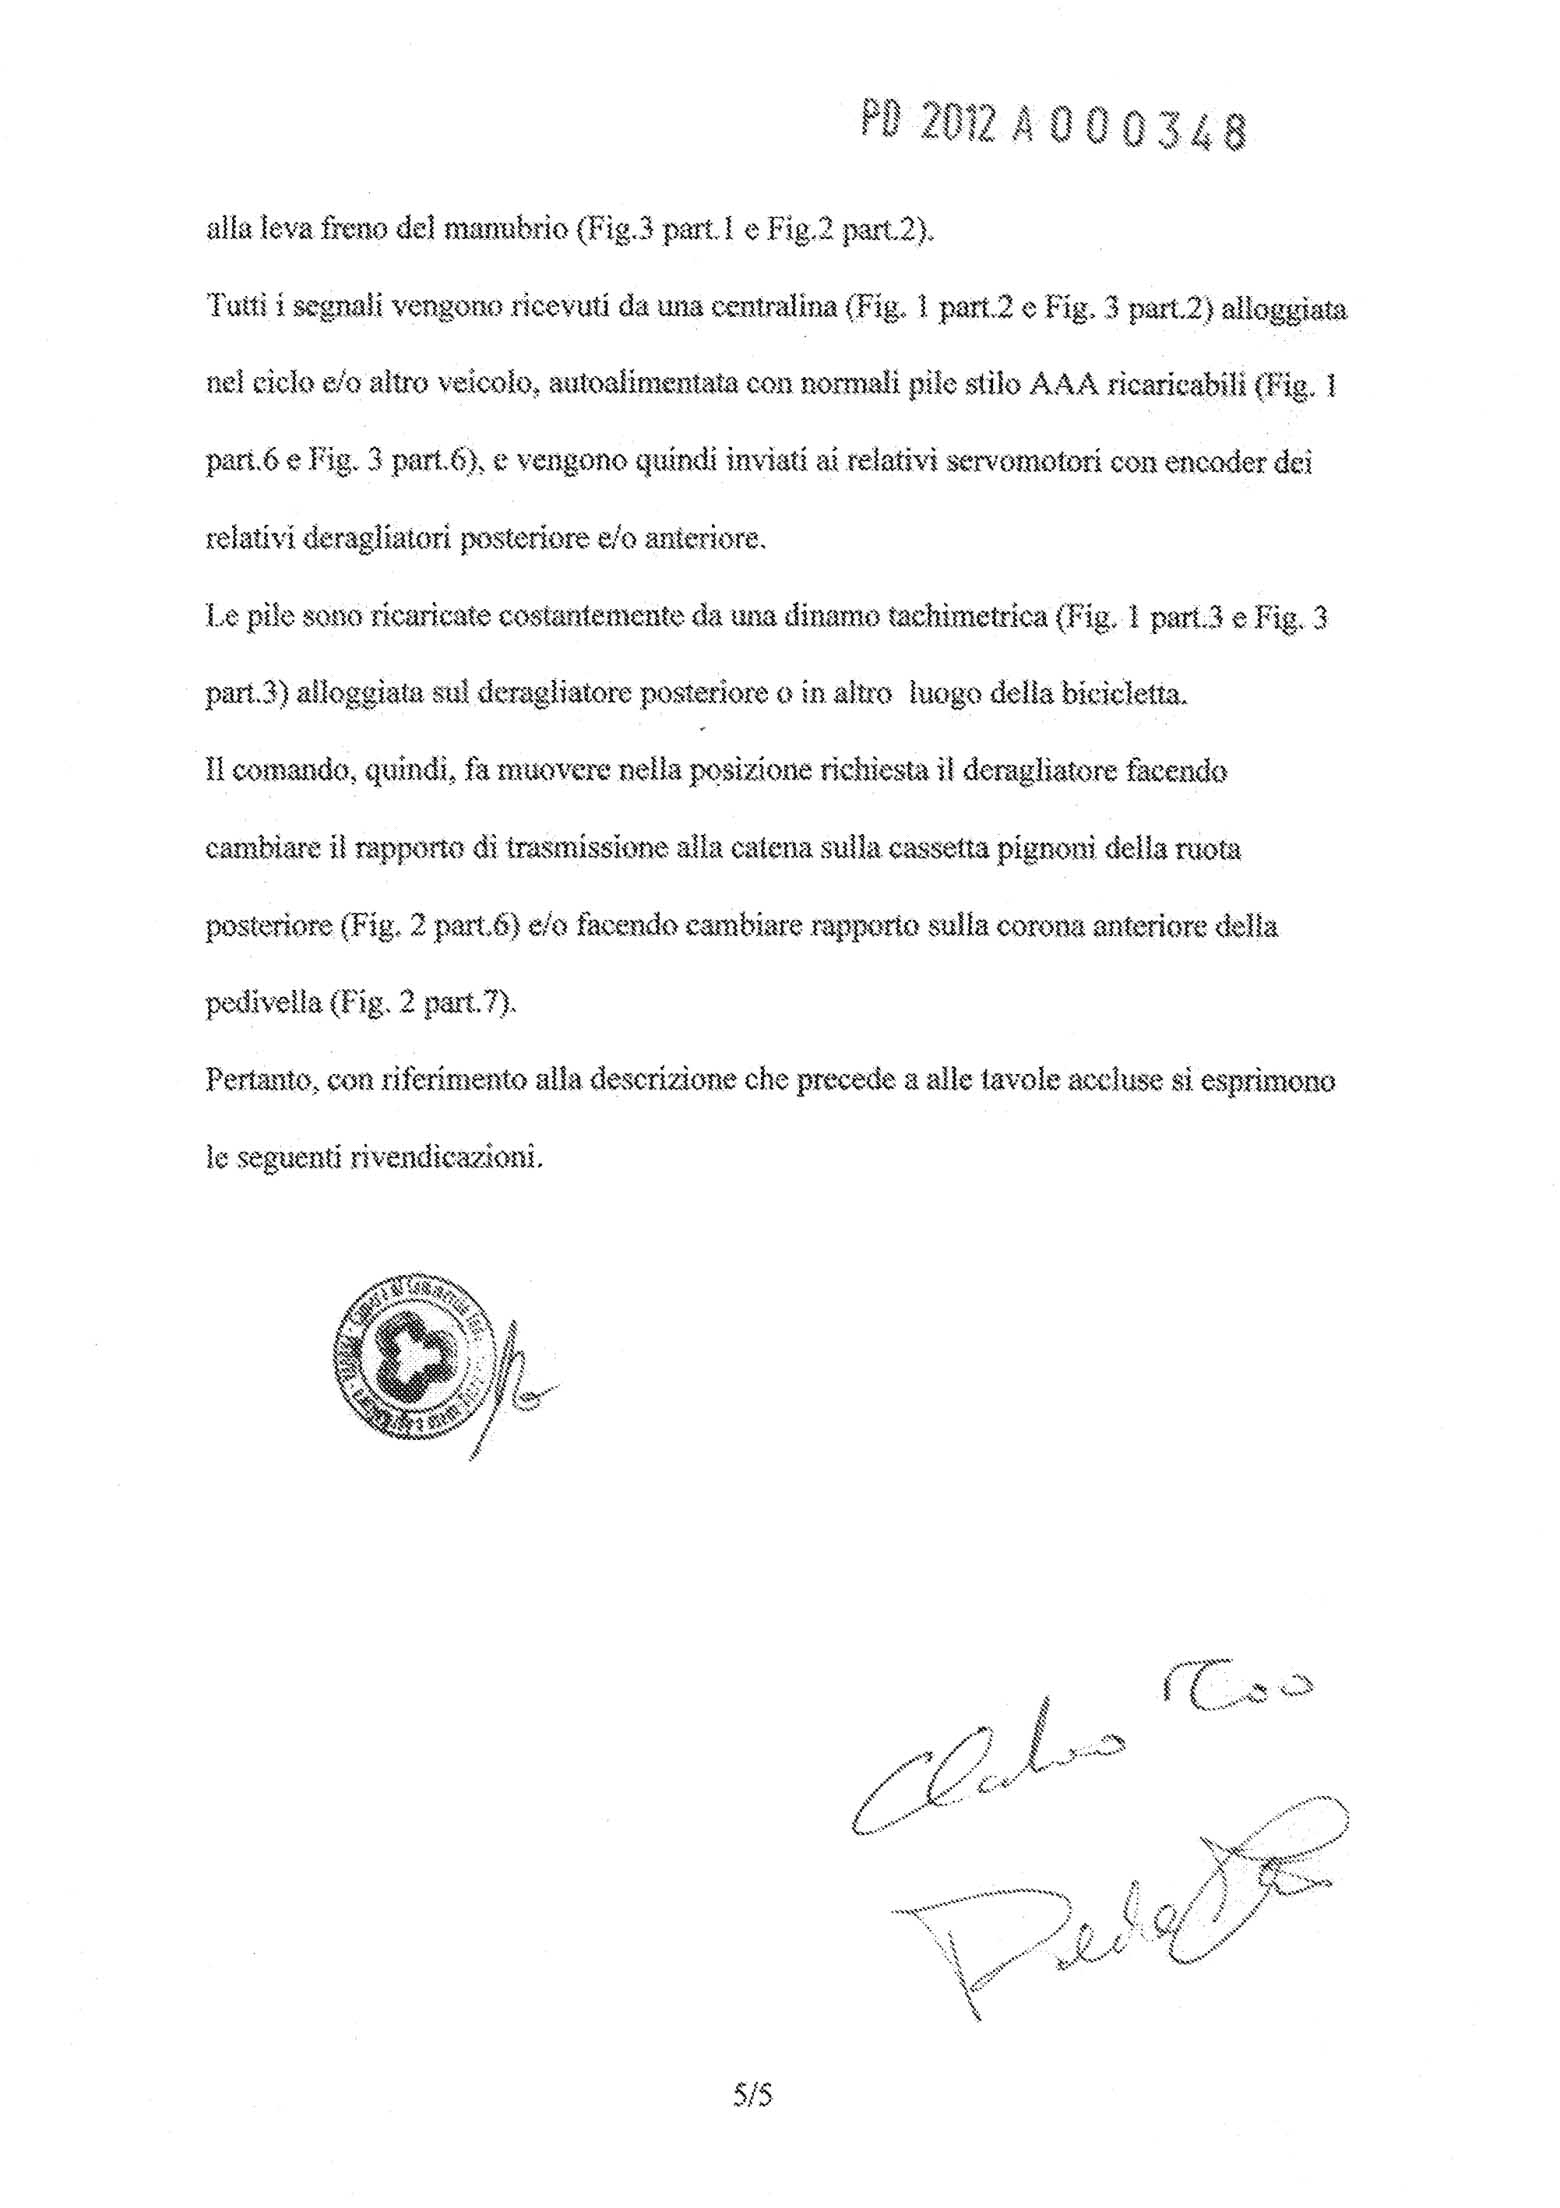 Italian Patent 2012 A000348 - Tiso main scan 06 image